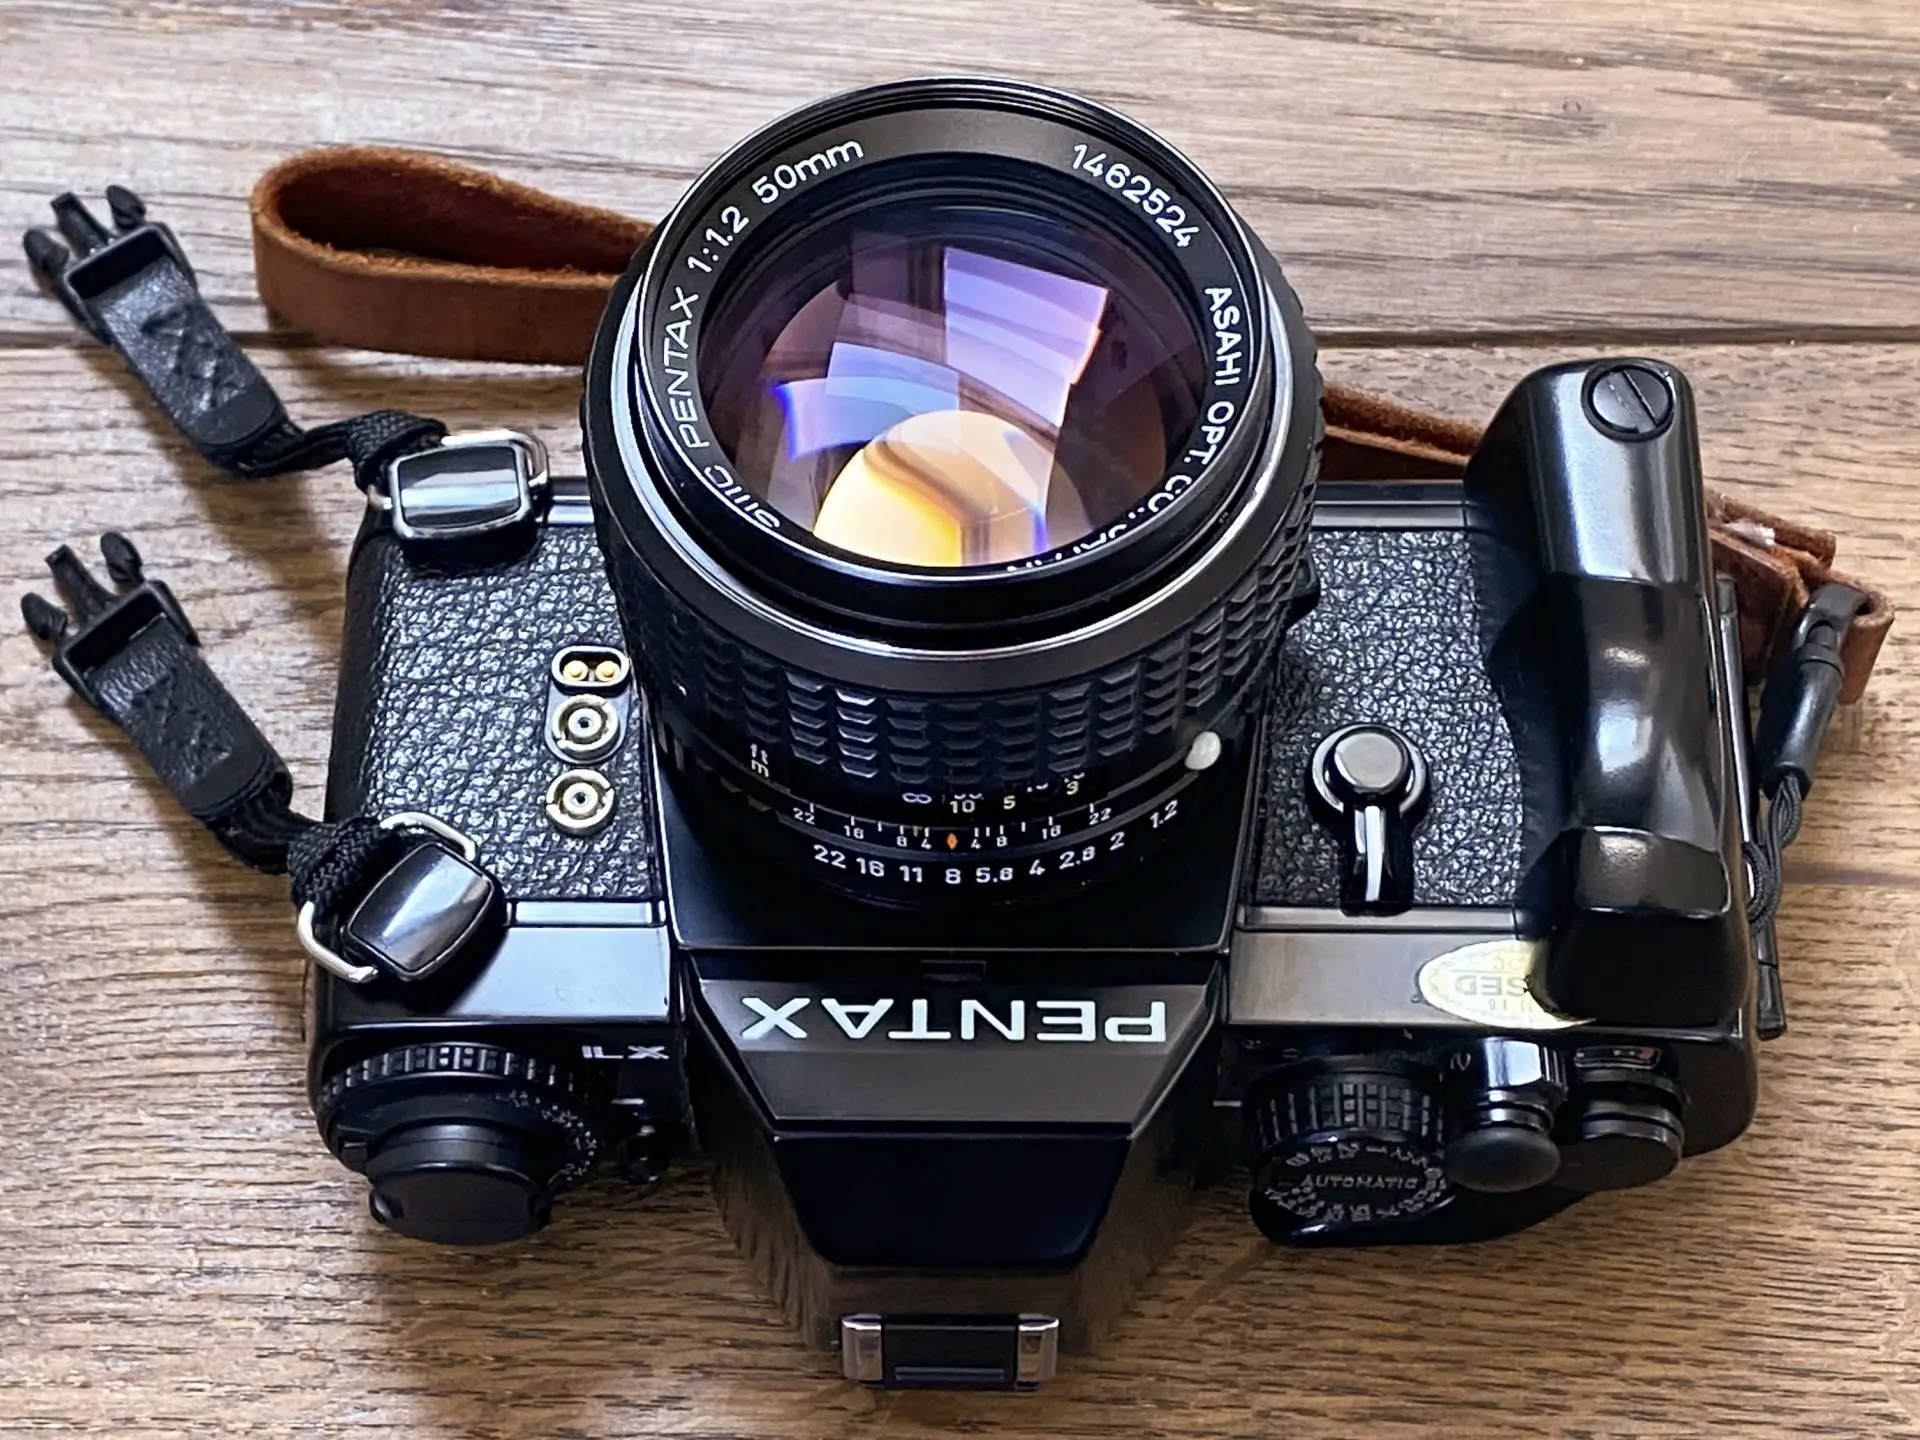 Pentax 50mm f/1.2 SMC lens on Film with a Pentax LX - by Aivaras